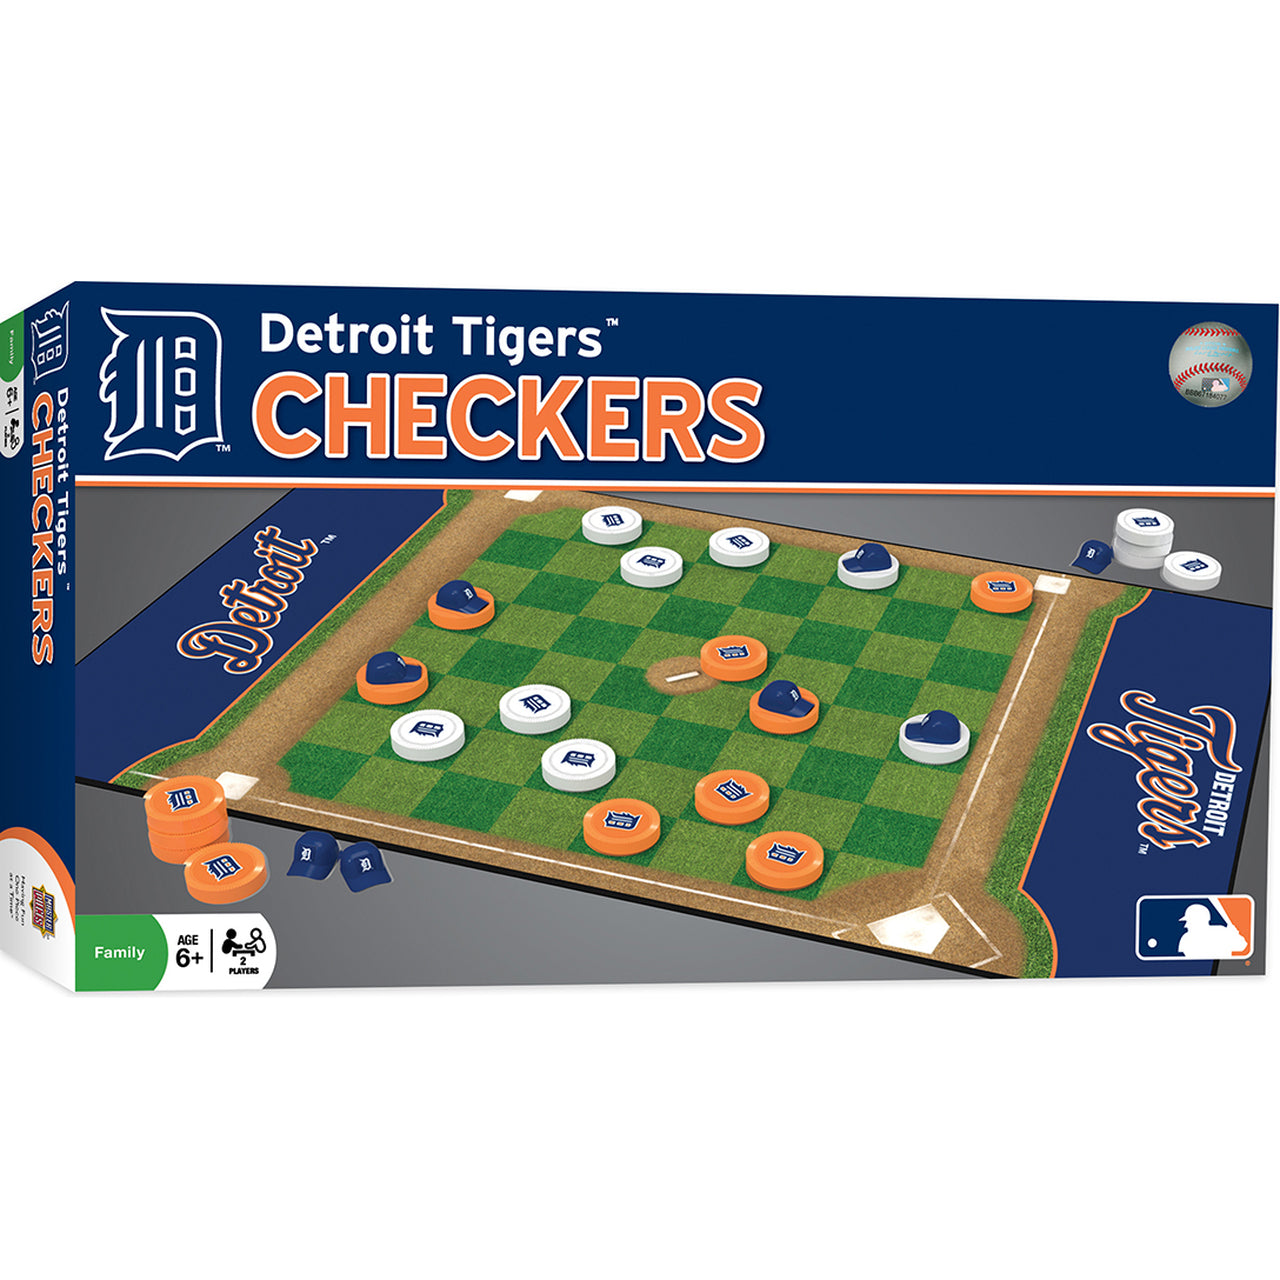 DETROIT TIGERS CHECKERS BOARD GAME